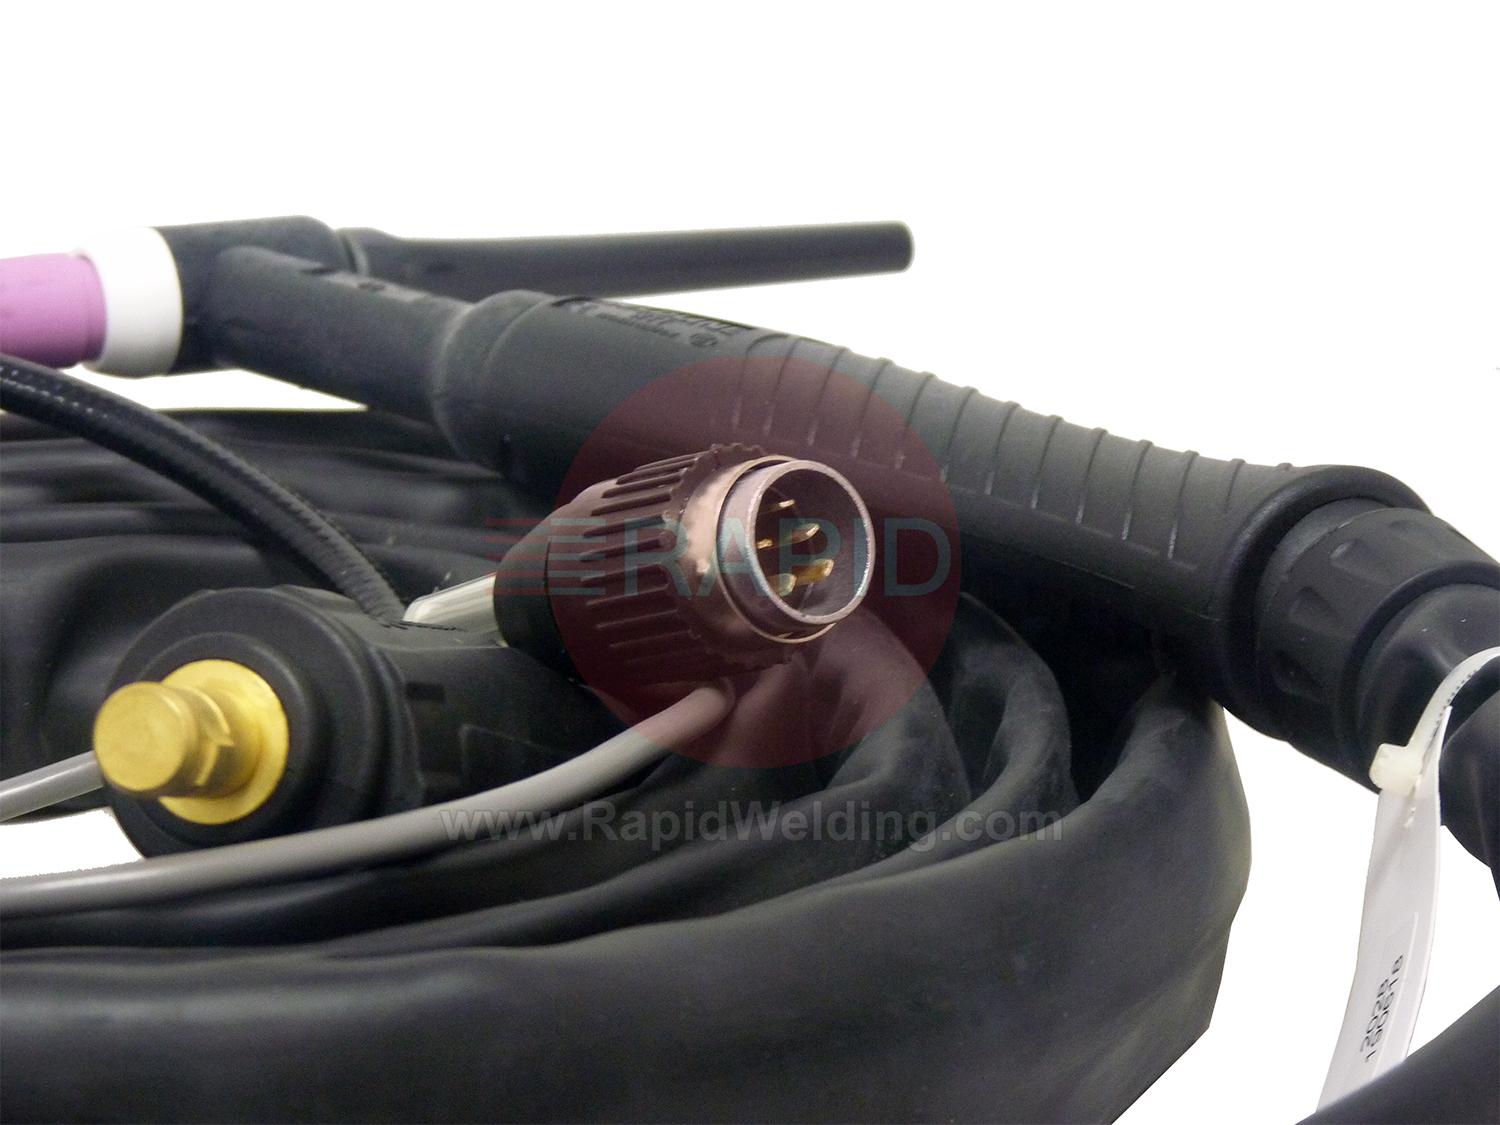 W000278887  Lincoln WTT2 26 EB Air-Cooled TIG Torch with 5 Pin Plug, 4m